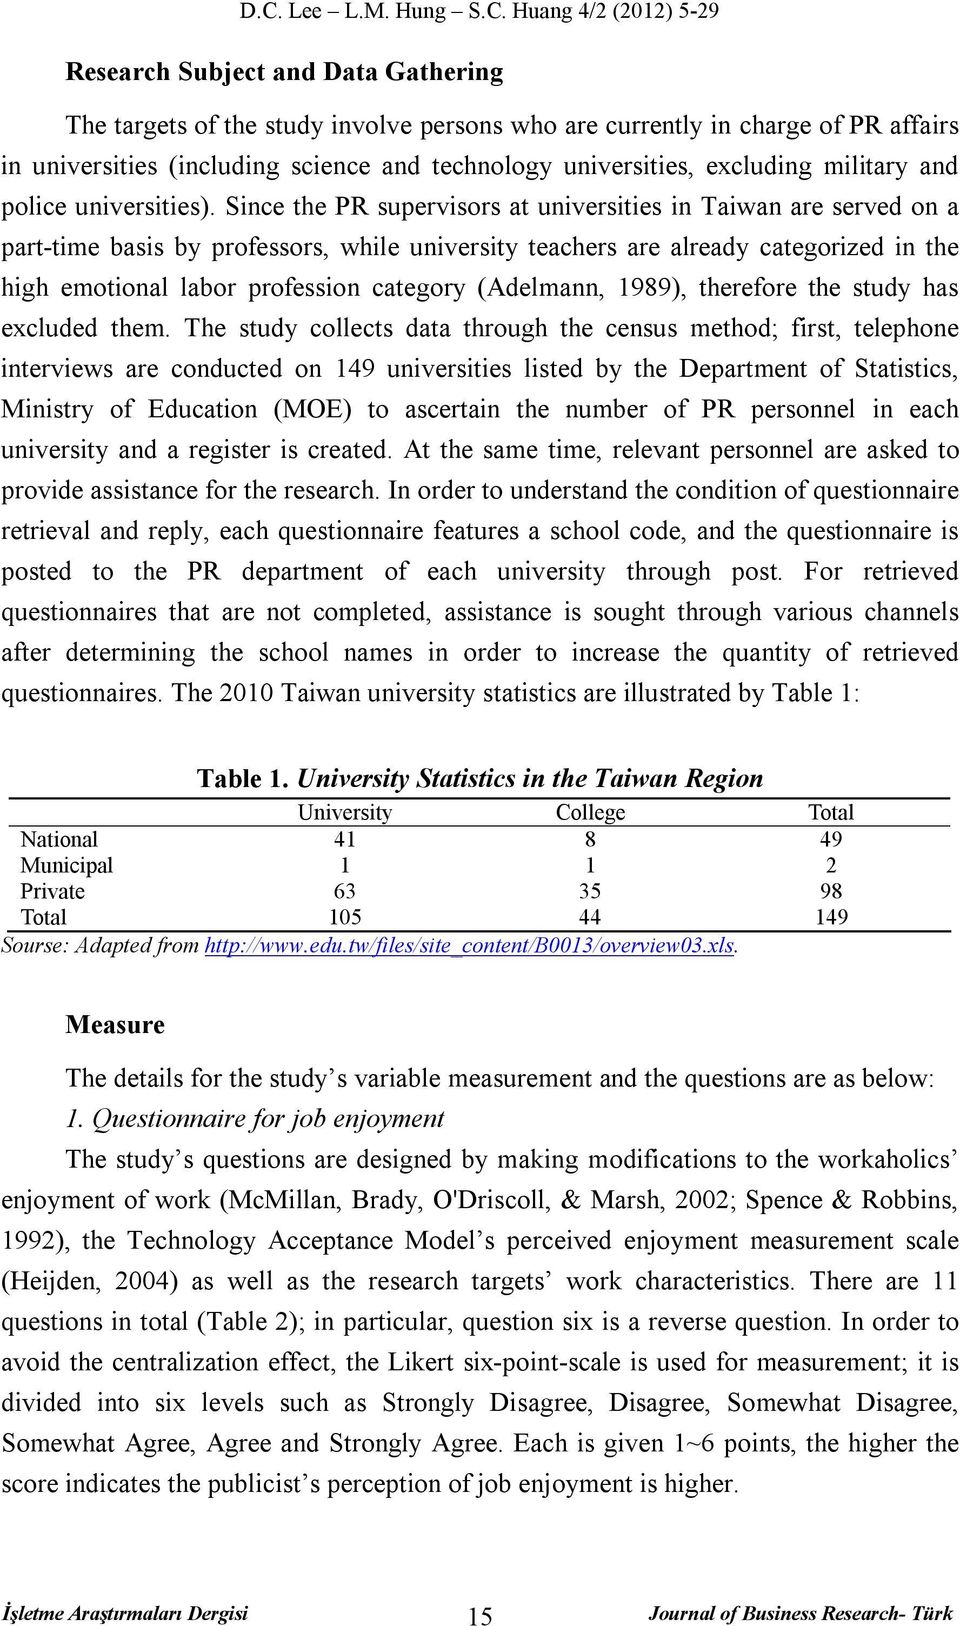 Since the PR supervisors at universities in Taiwan are served on a part-time basis by professors, while university teachers are already categorized in the high emotional labor profession category